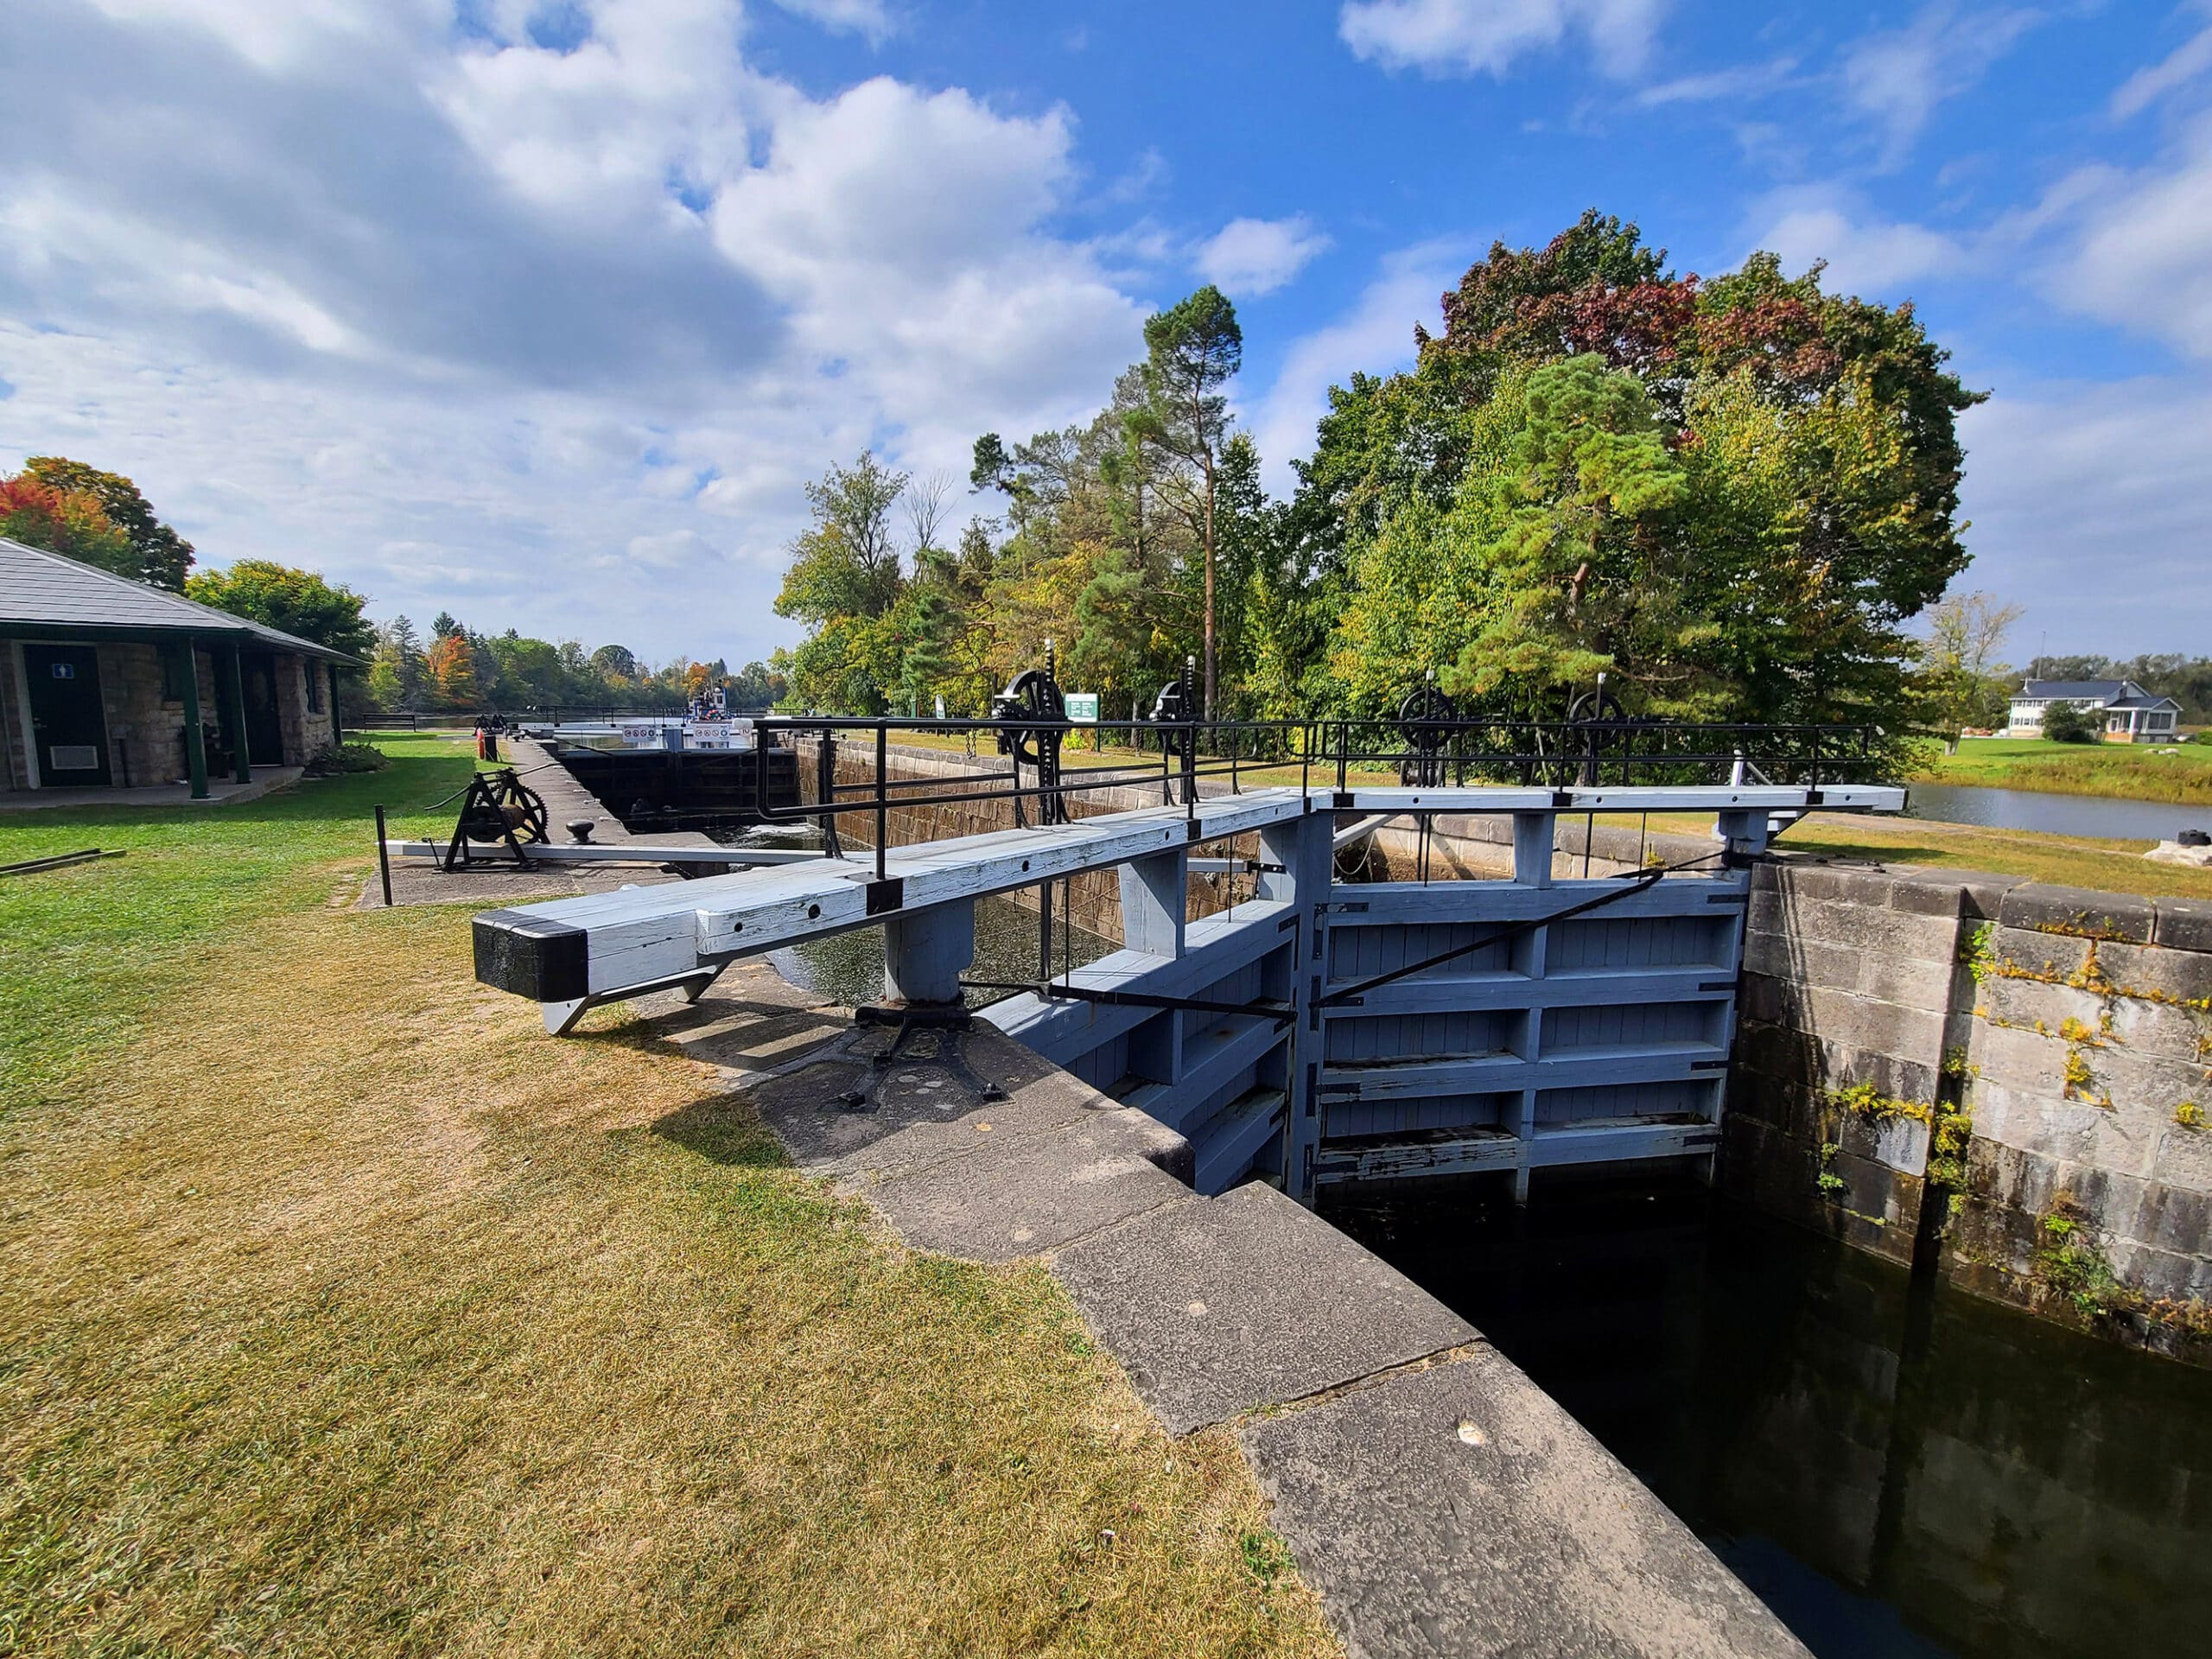 A small lock on the Rideau River.